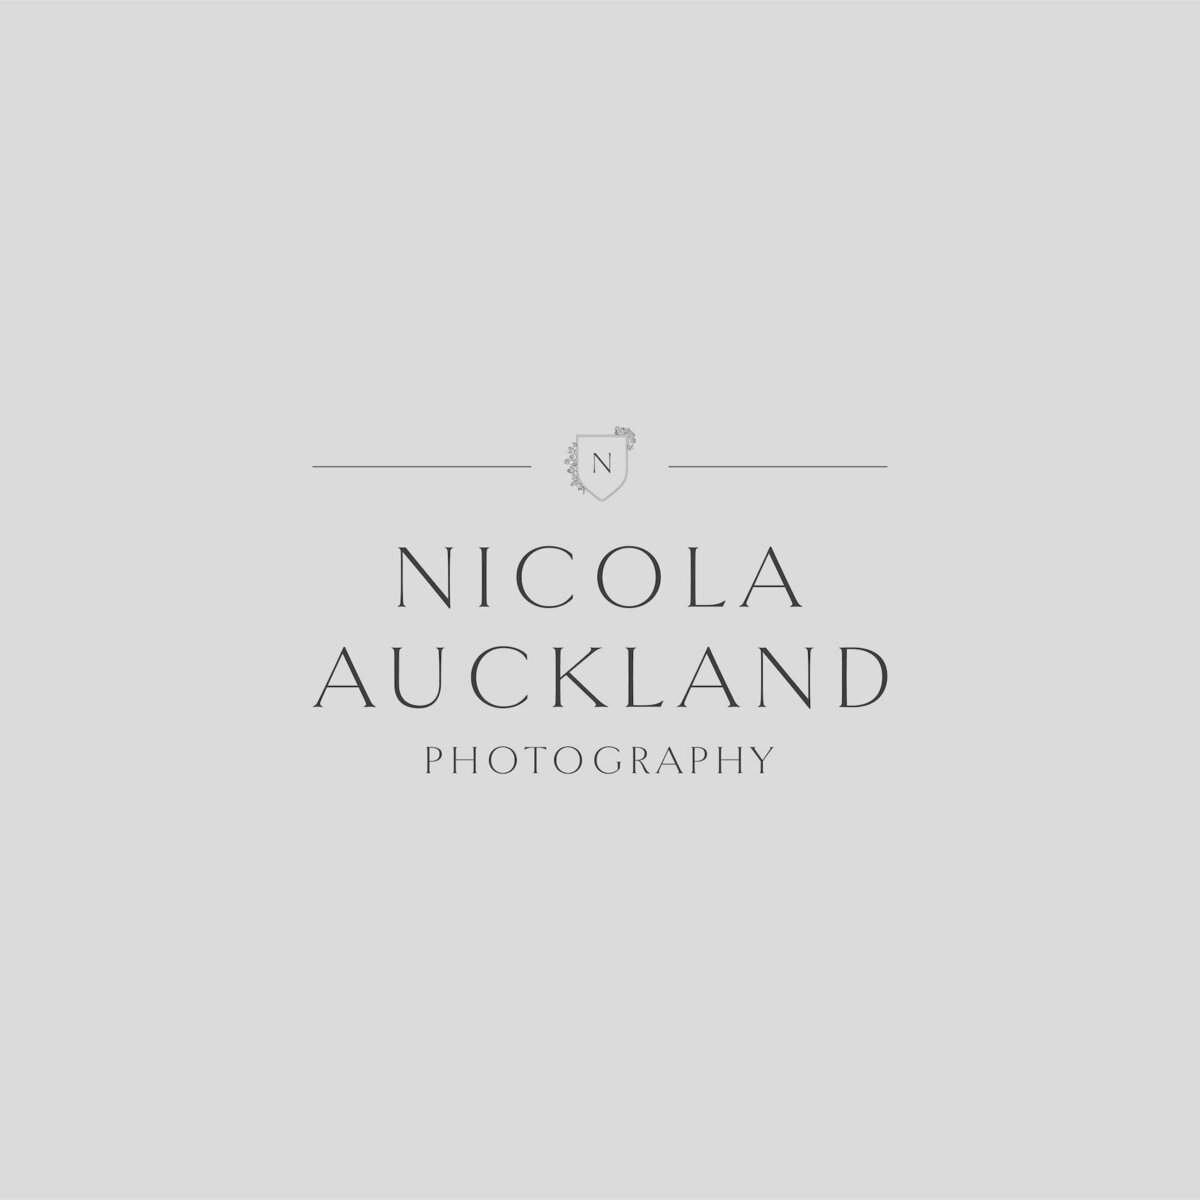 NICOLA AUCKLAND LAUNCH_IG FEED SECONDARY